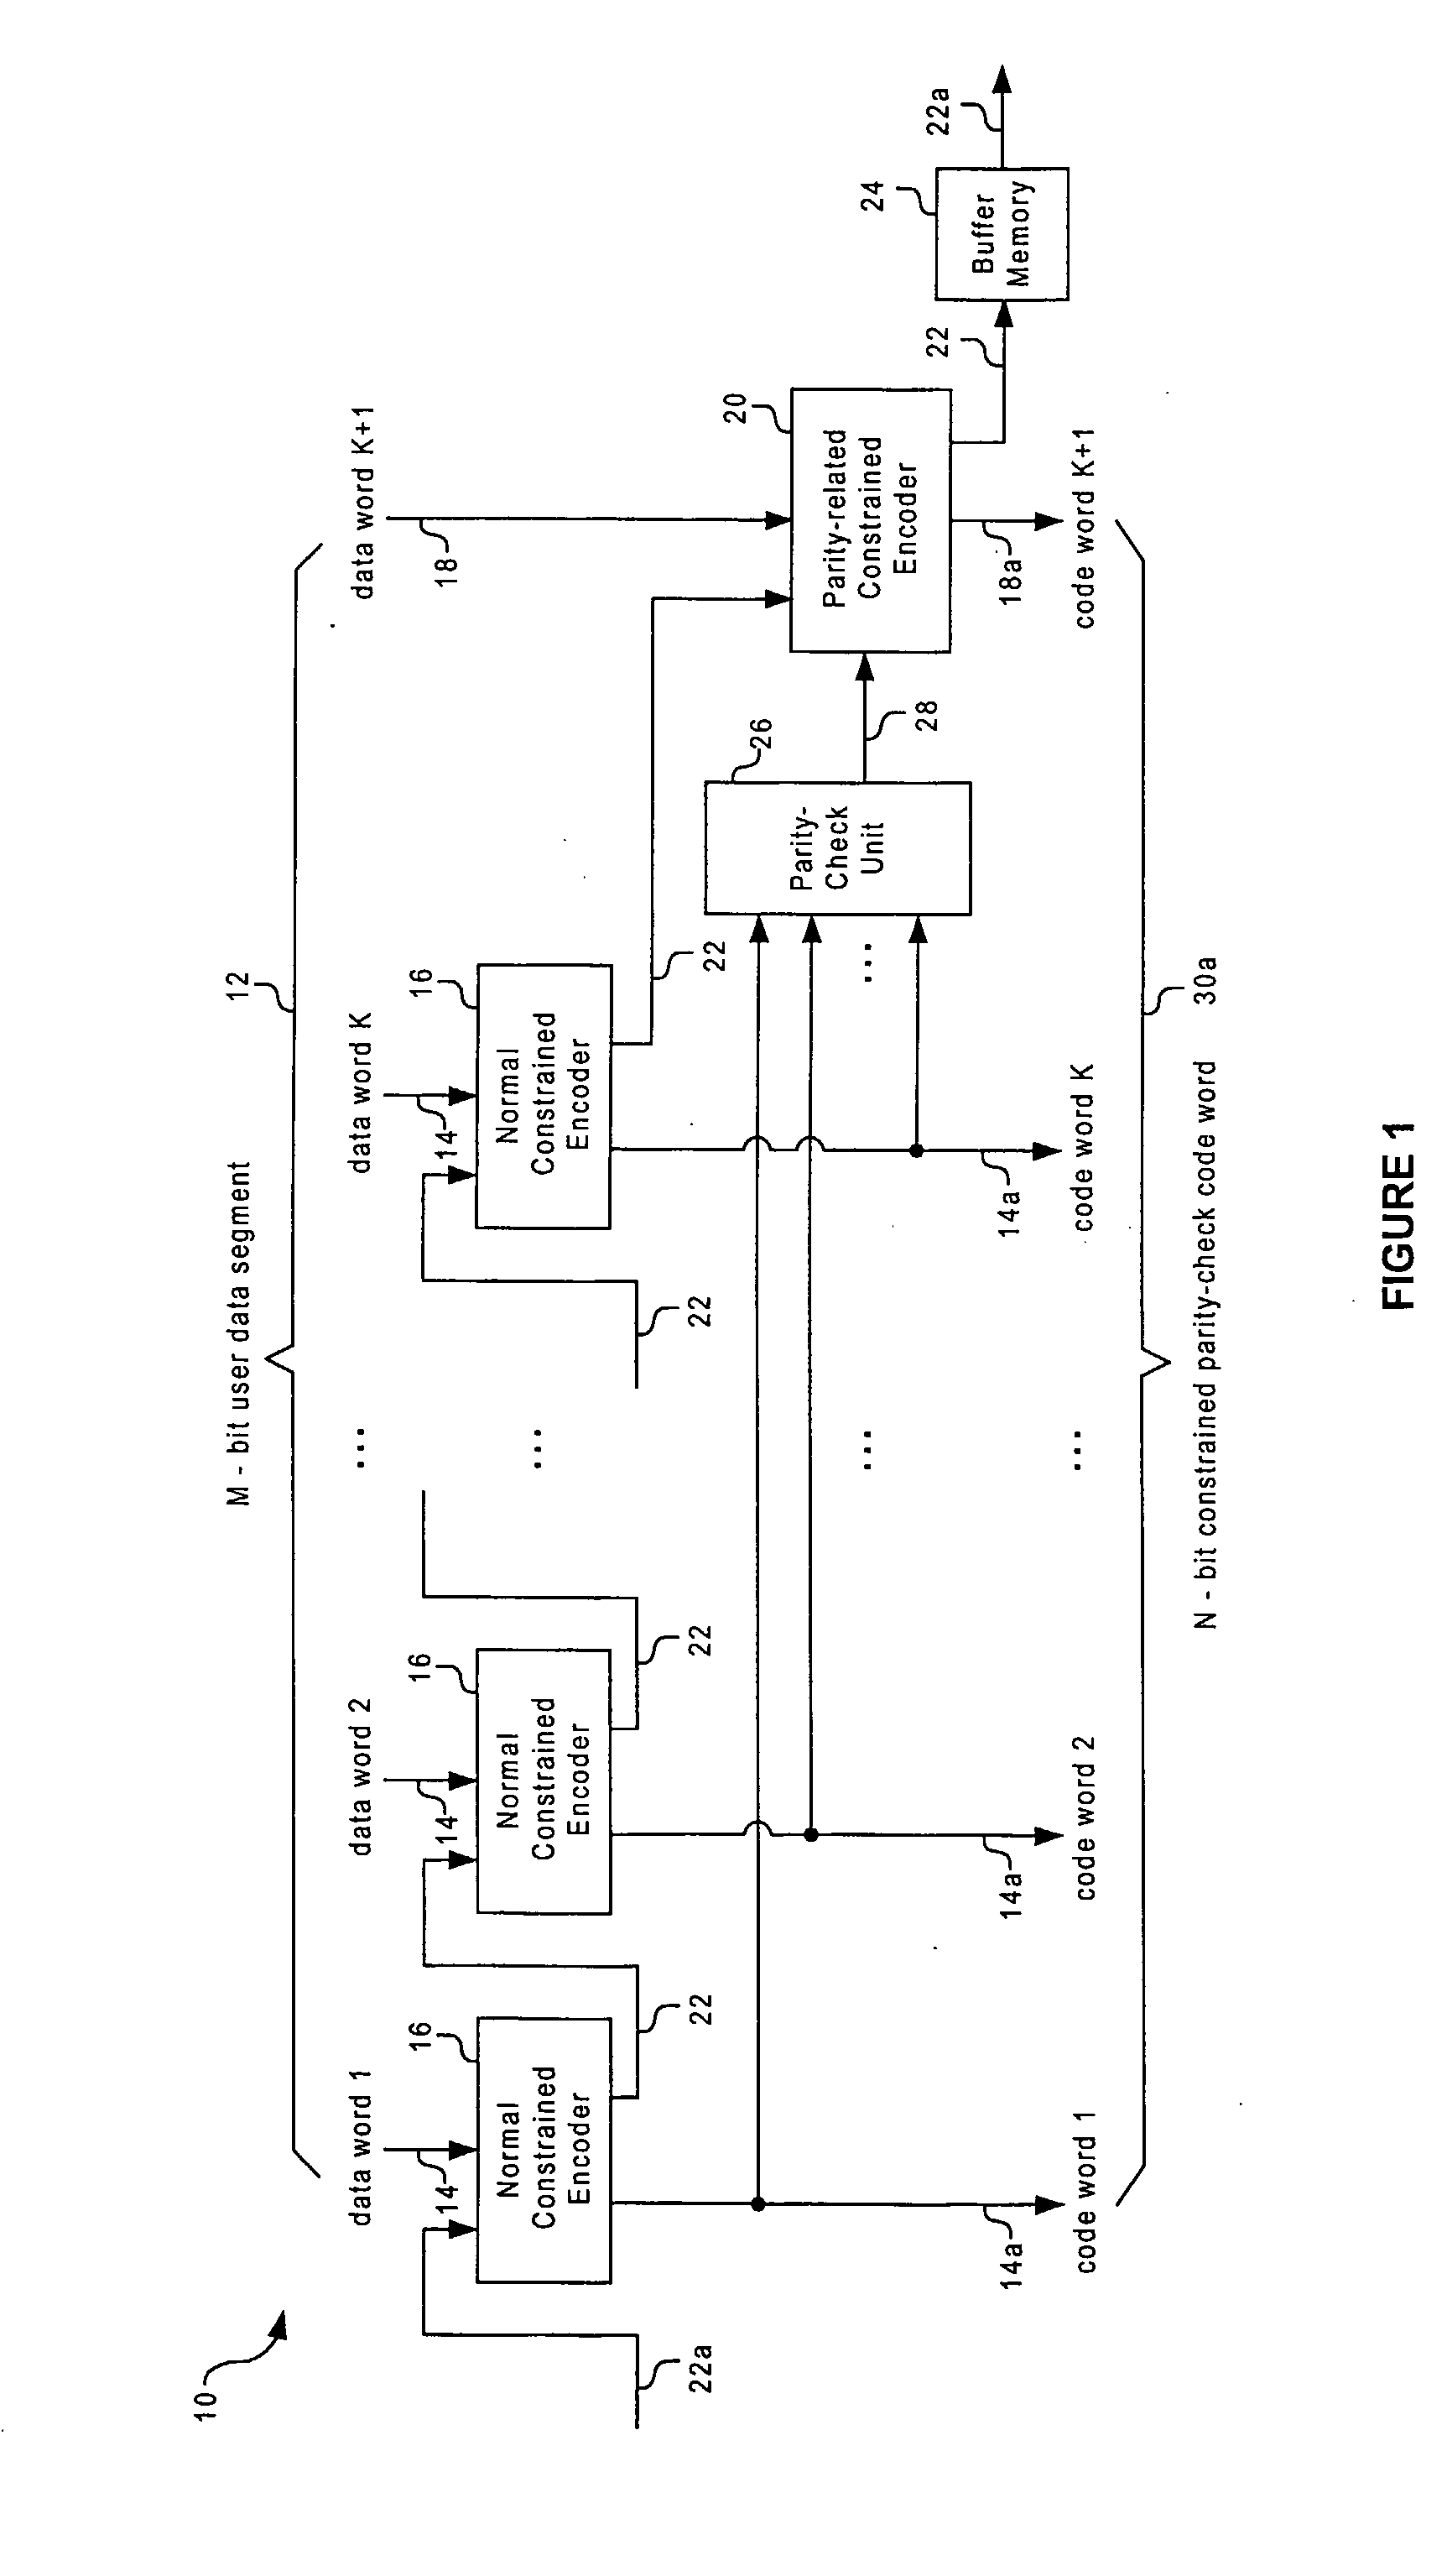 Method And System For Encoding And Decoding Information With Modulation Constraints And Error Control